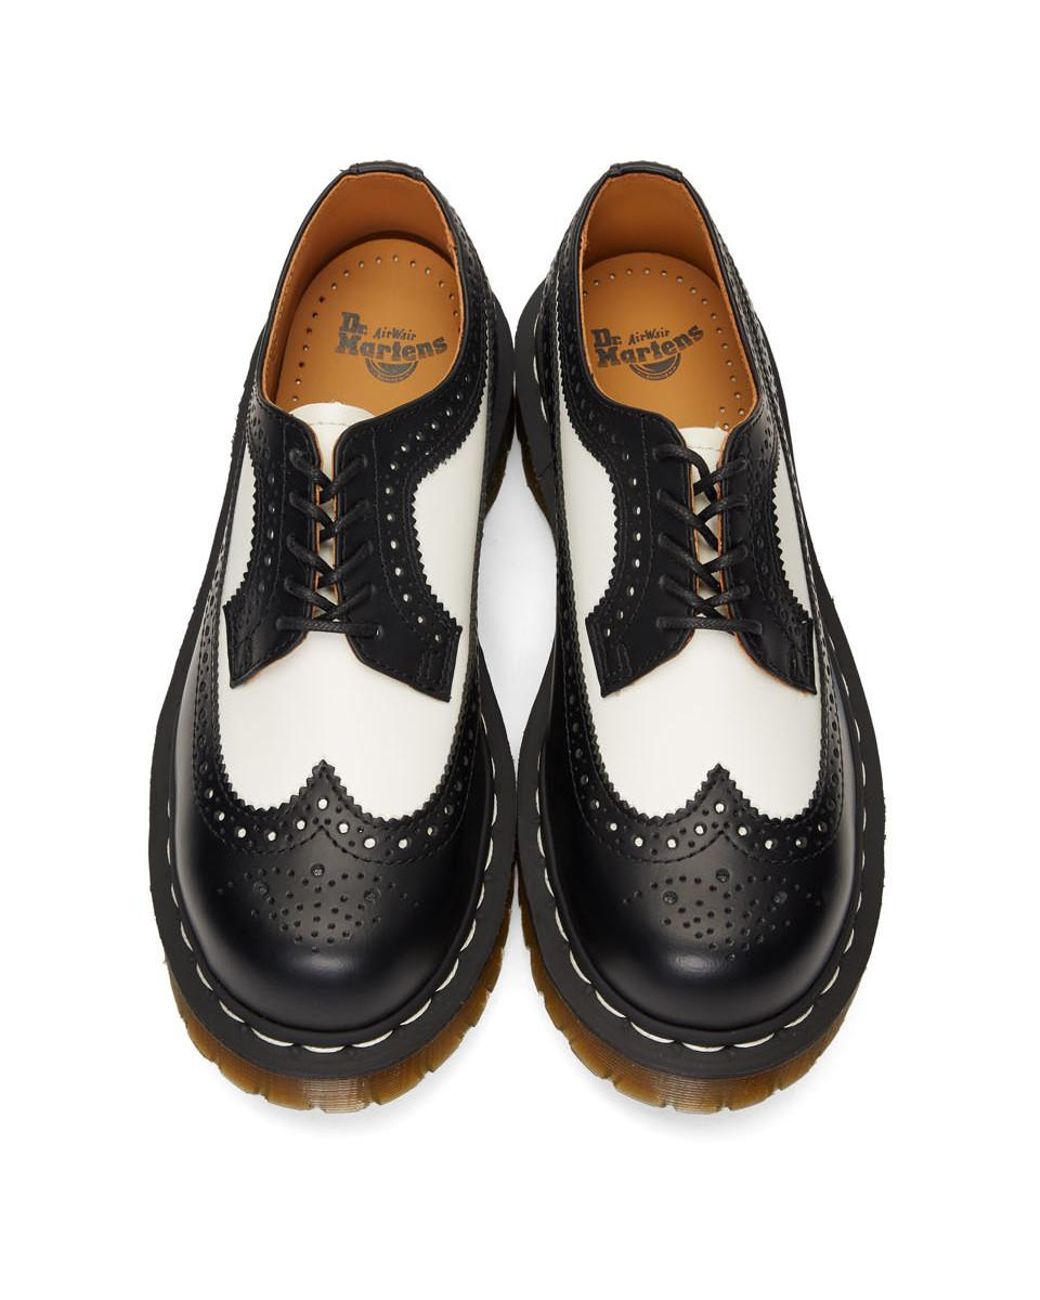 Dr. Martens Black And White 3989 Bex Brogues | Lyst